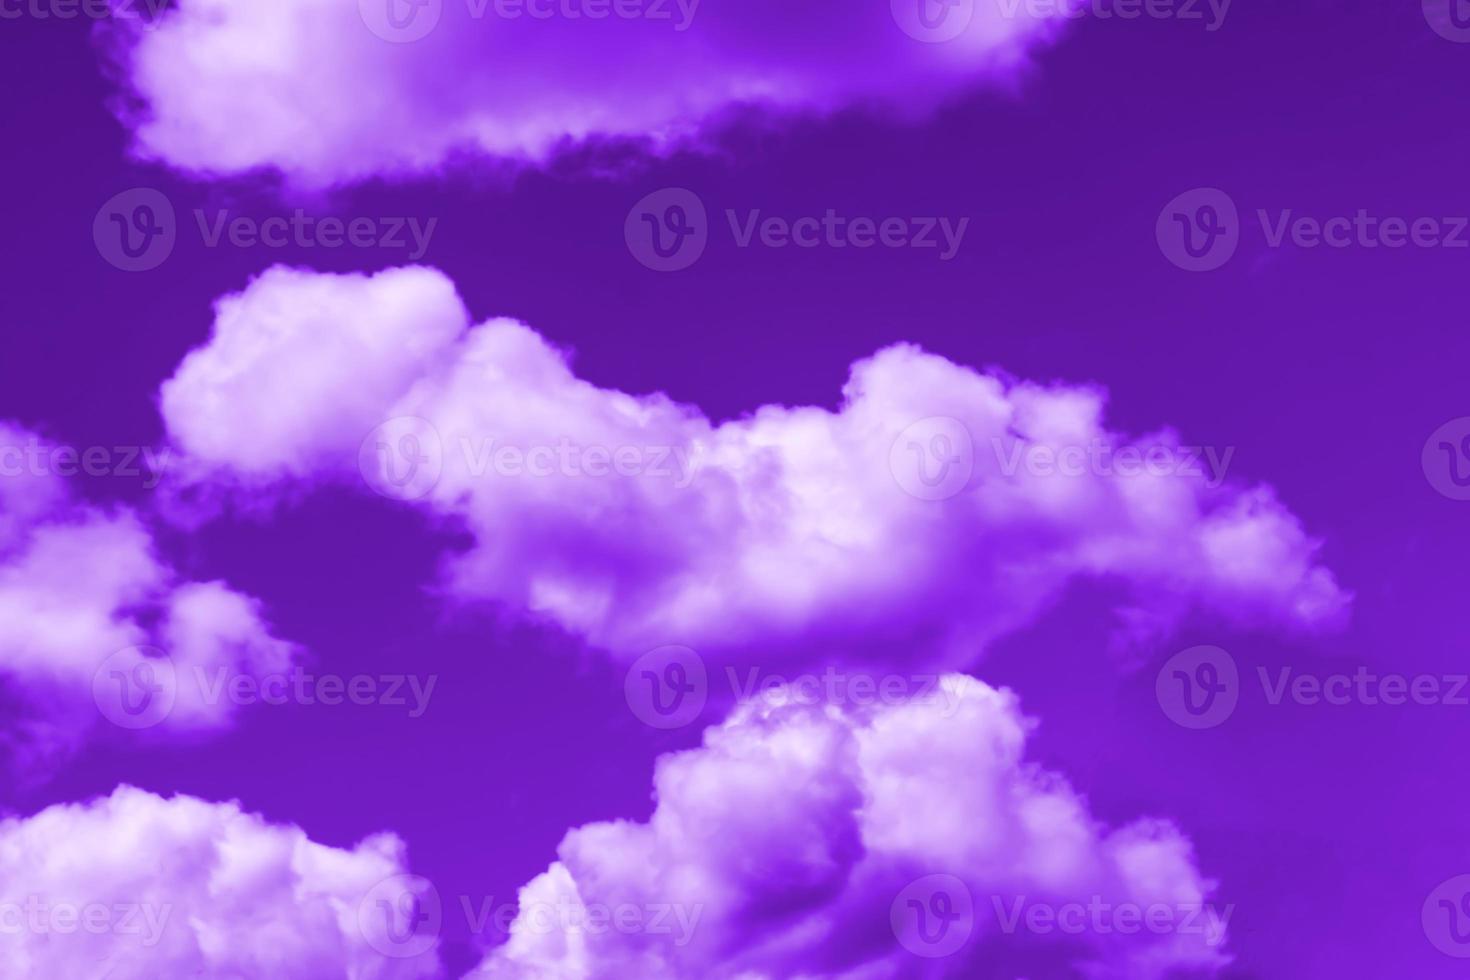 Purple Cloud Images  Free Photos PNG Stickers Wallpapers  Backgrounds   rawpixel